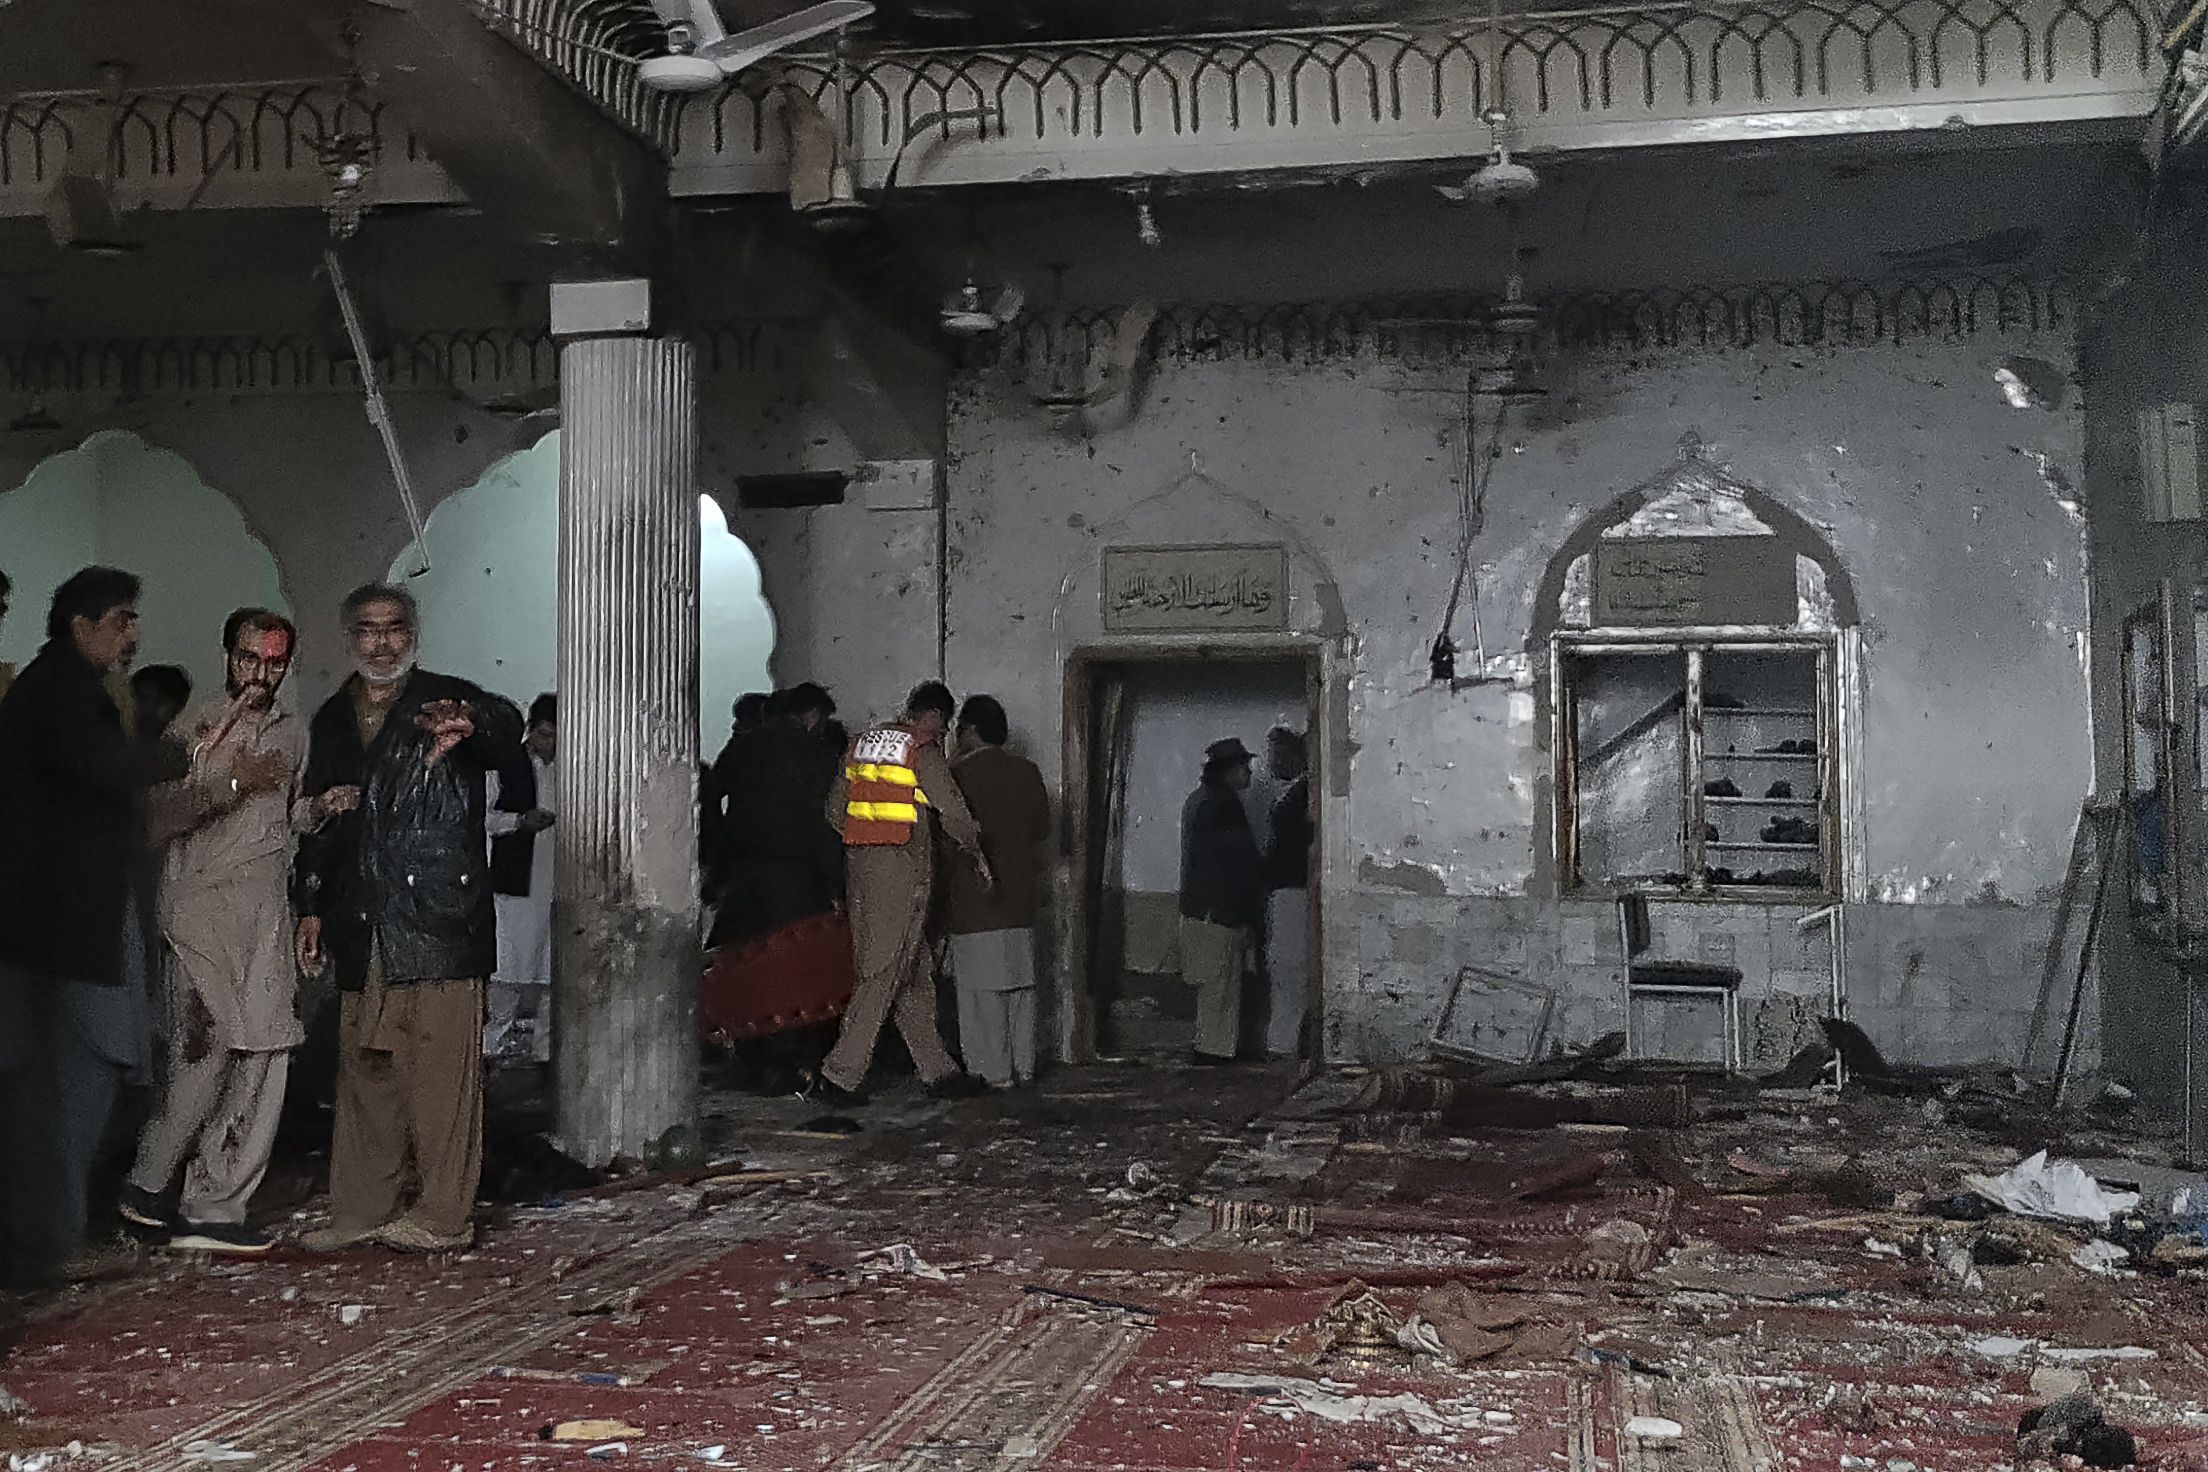 Security personnel inspect a mosque after a bomb blast in Peshawar on March 4, 2022. At least 30 people were killed and 56 wounded in a huge blast at a mosque in the northwestern Pakistani city of Peshawar, a hospital official said on March 4.